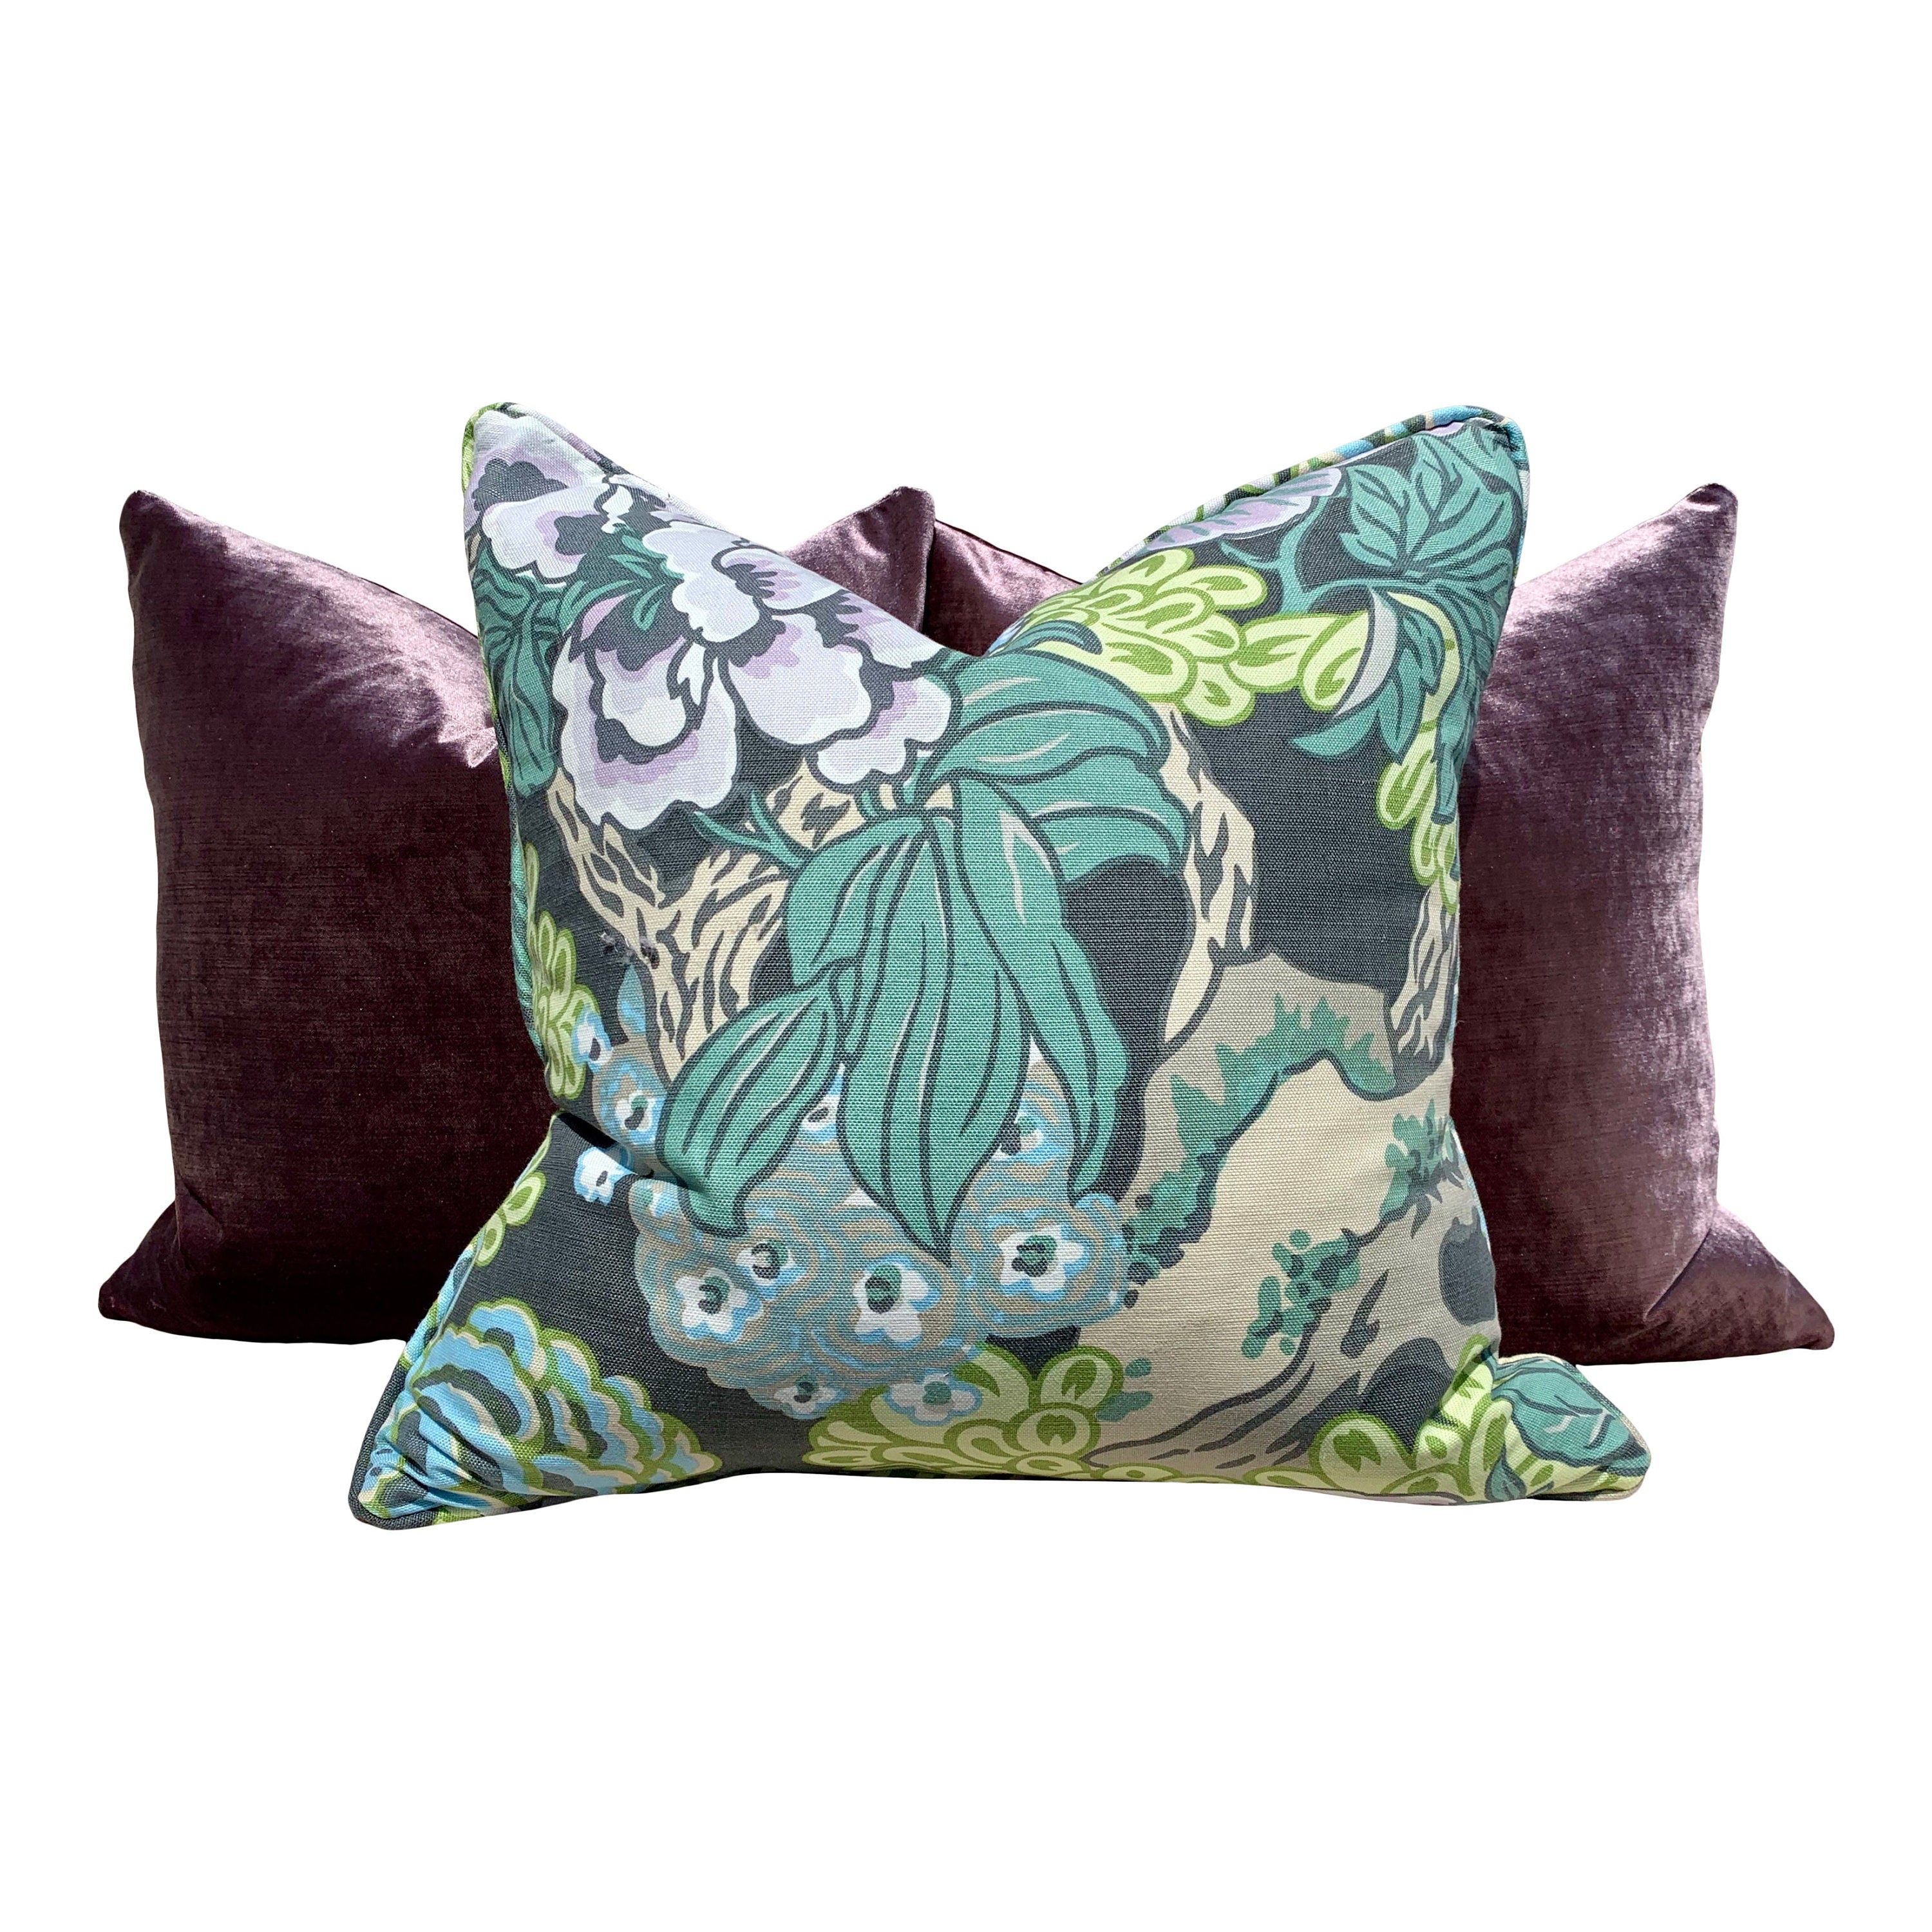 Thibaut Honshu Pillow in Gray and Lilac. Chinoiserie Floral Pillow. Lumbar Pillow. Designer pillow, accent pillow cover, high end cushion